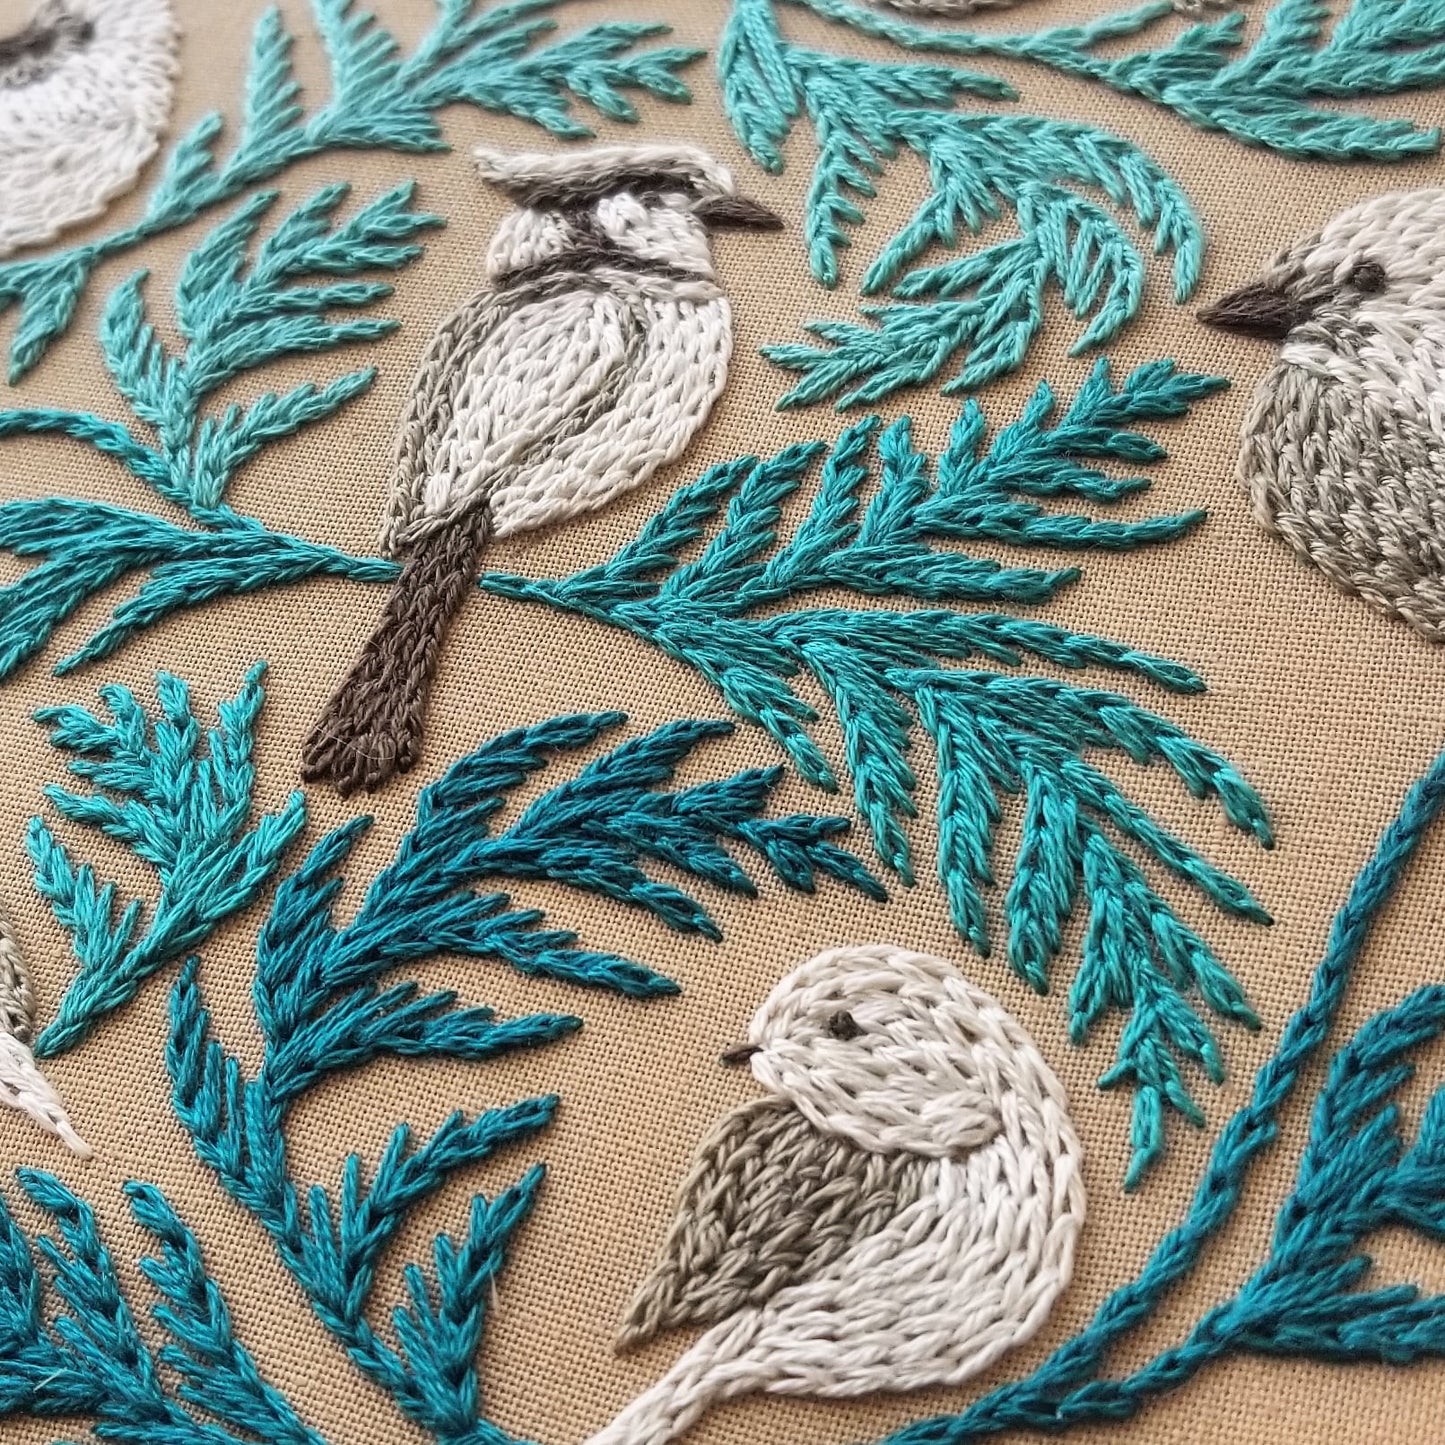 Year of Birds Embroidery Kit – Jessica Long Embroidery